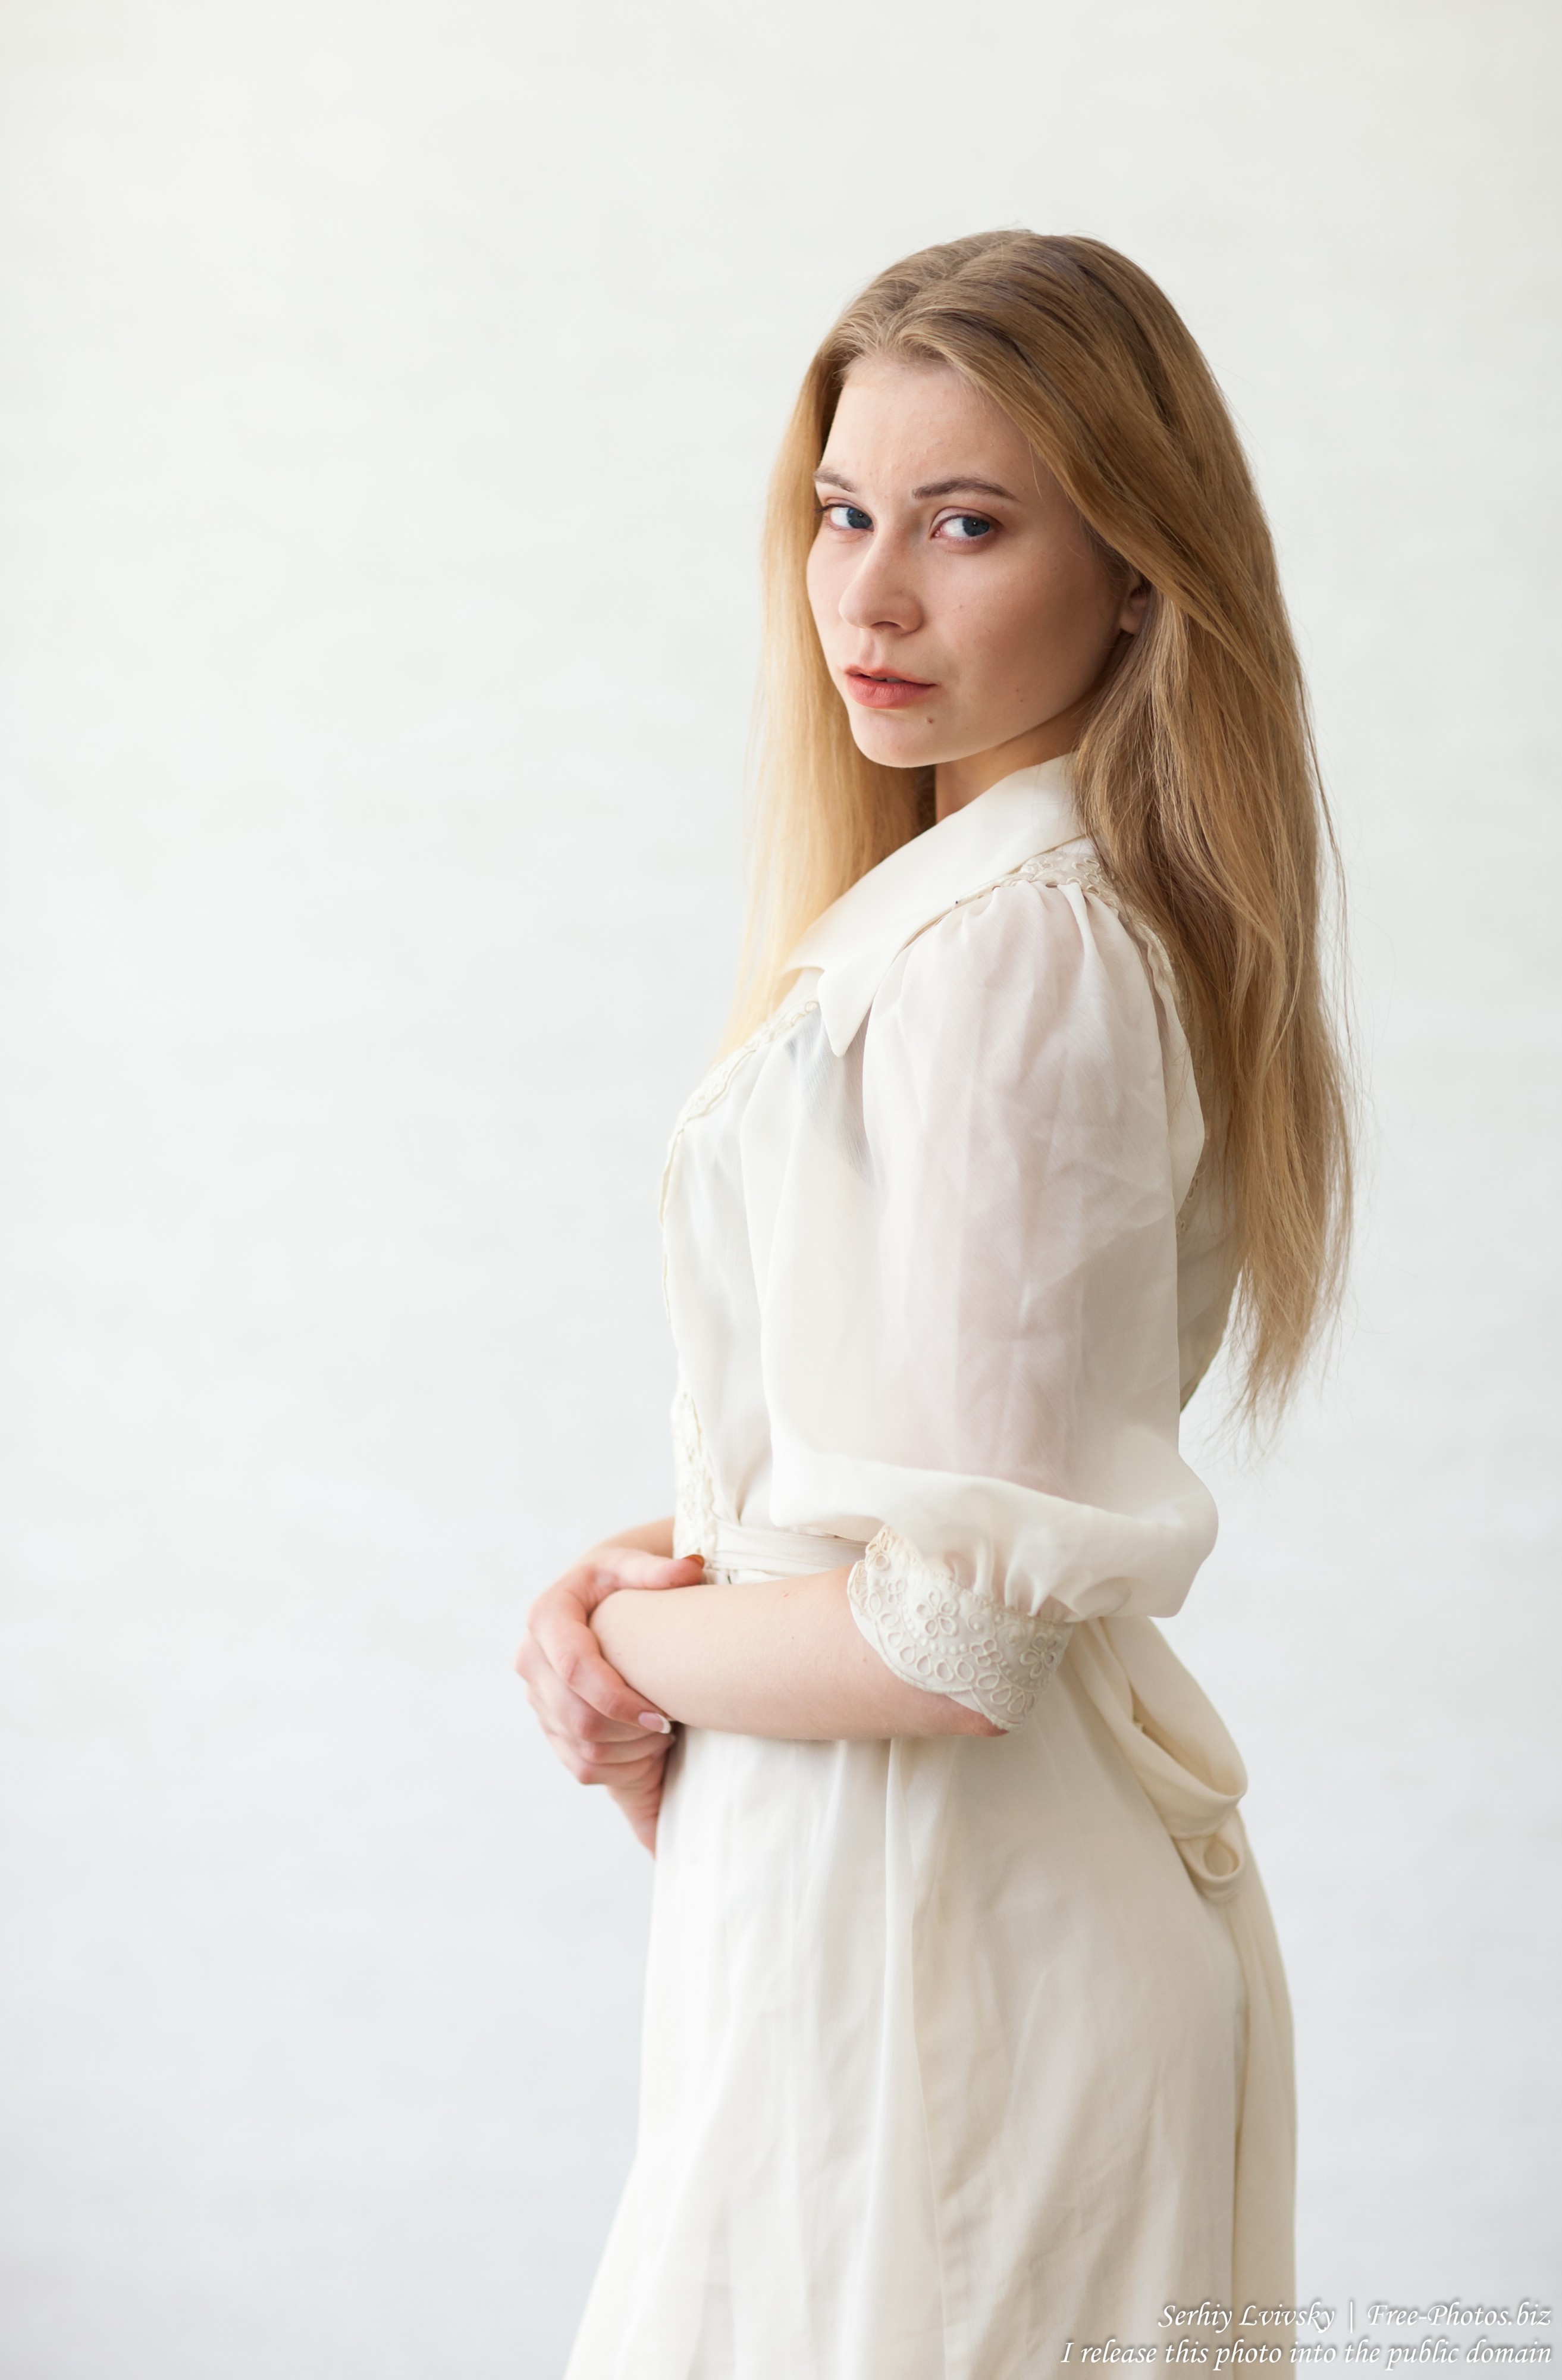 Vladyslava - an 18-year-old natural blonde girl photographed by Serhiy Lvivsky in June 2017, picture 10